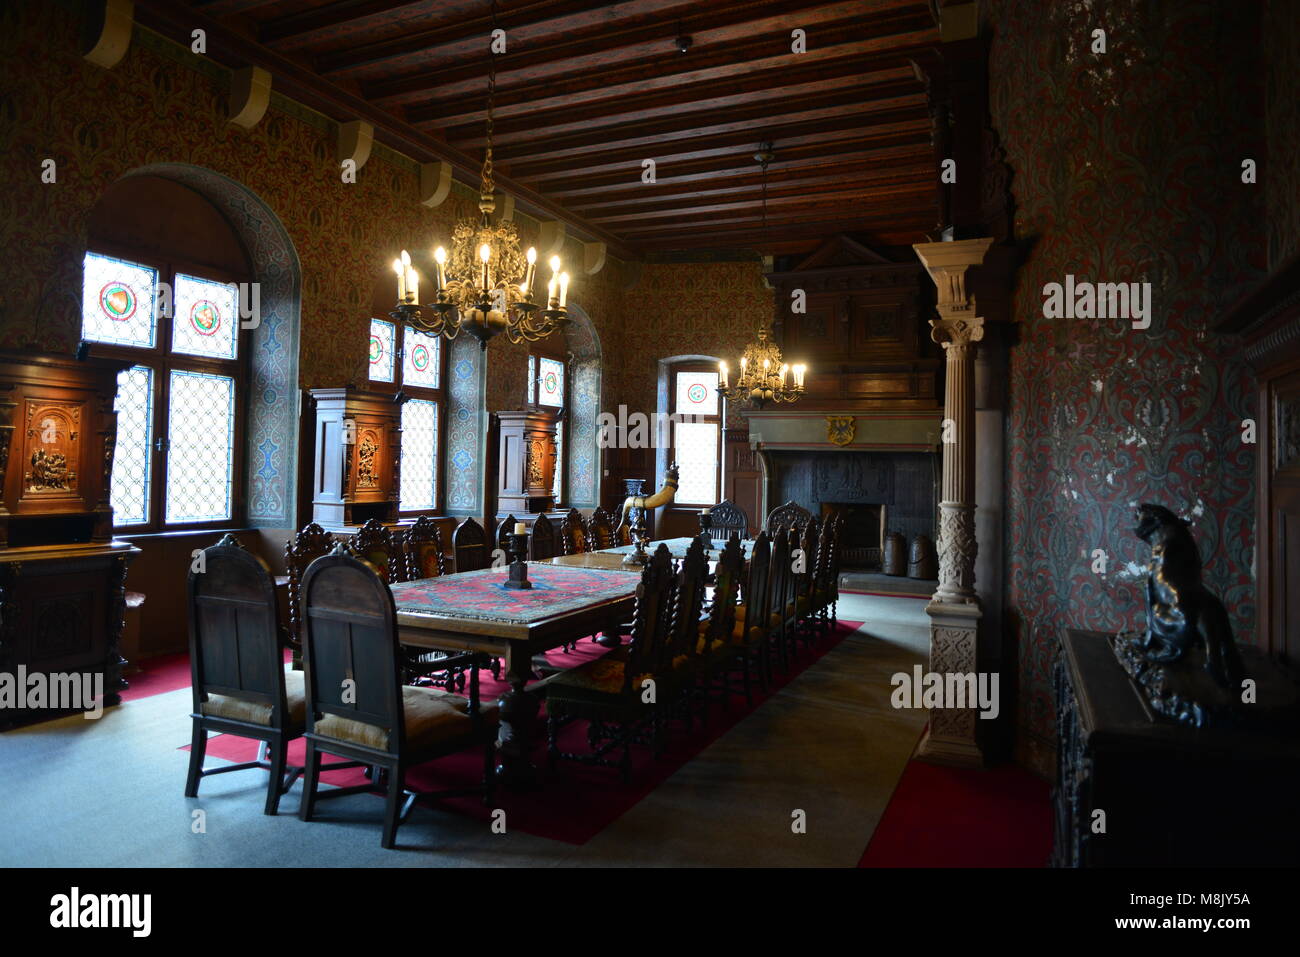 An interior of the Cochem Castle, Germany Stock Photo - Alamy